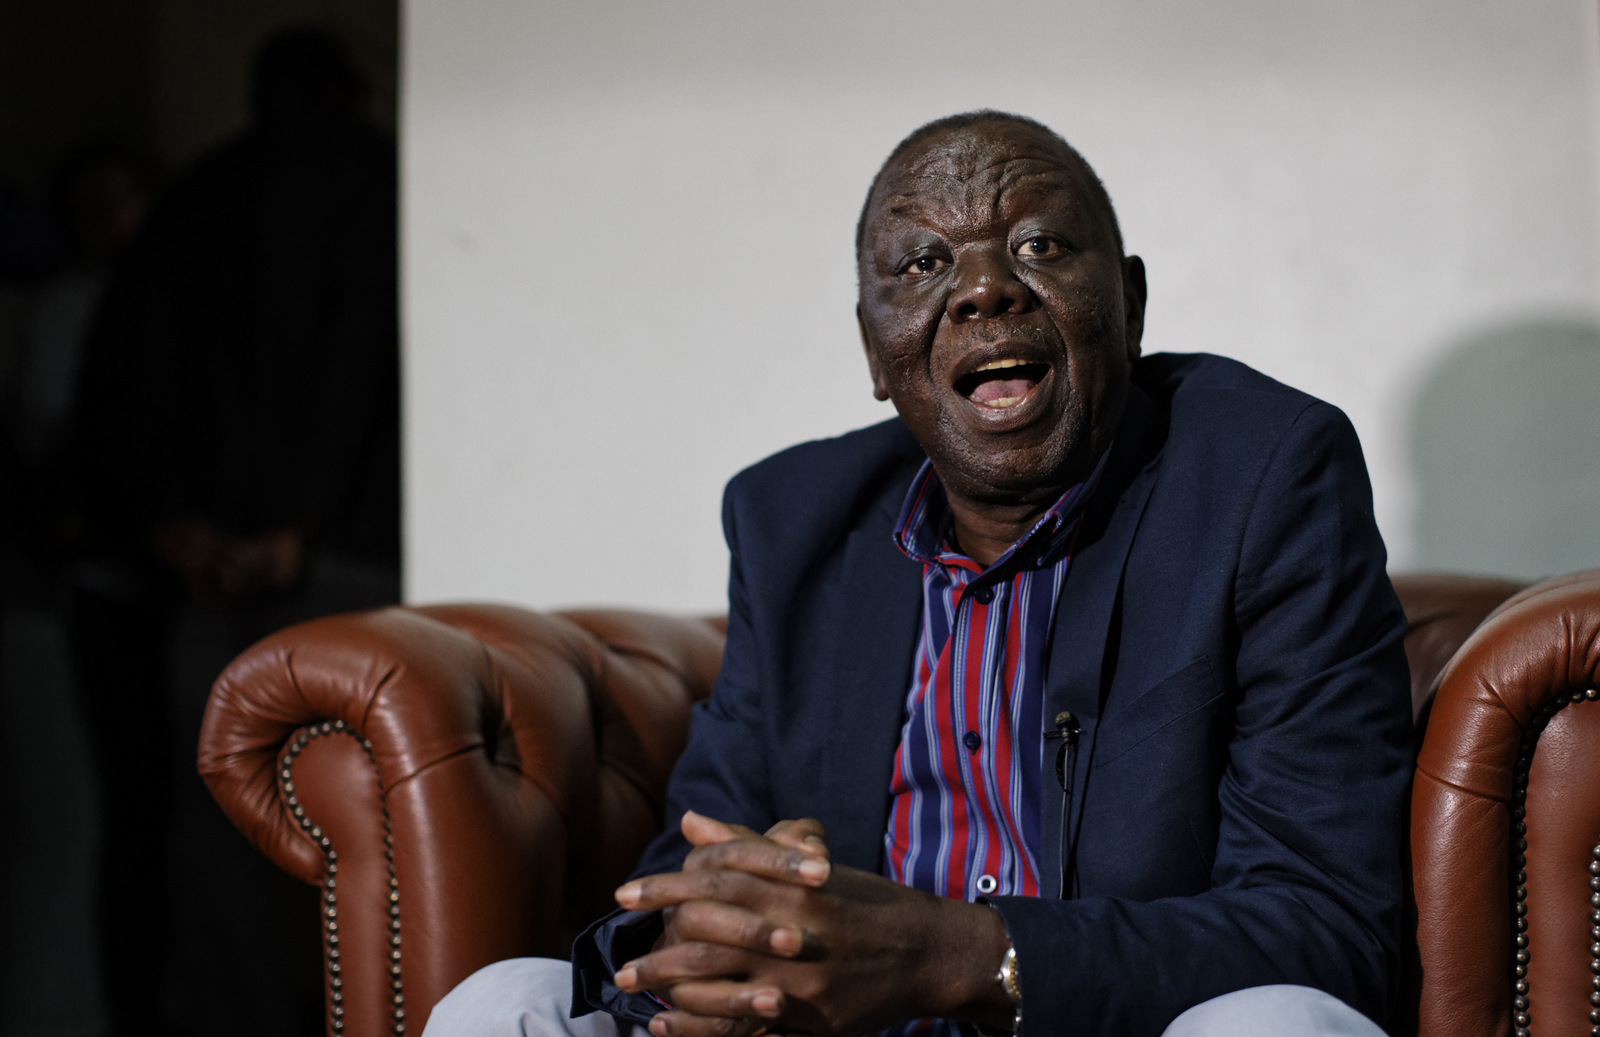 Zimbabwe opposition leader Morgan Tsvangirai speaks after giving a press conference at his home in Harare, Zimbabwe, Nov. 16, 2017. Tsvangirai said President Robert Mugabe must resign and called for a negotiated transitional mechanism. (AP/Ben Curtis)